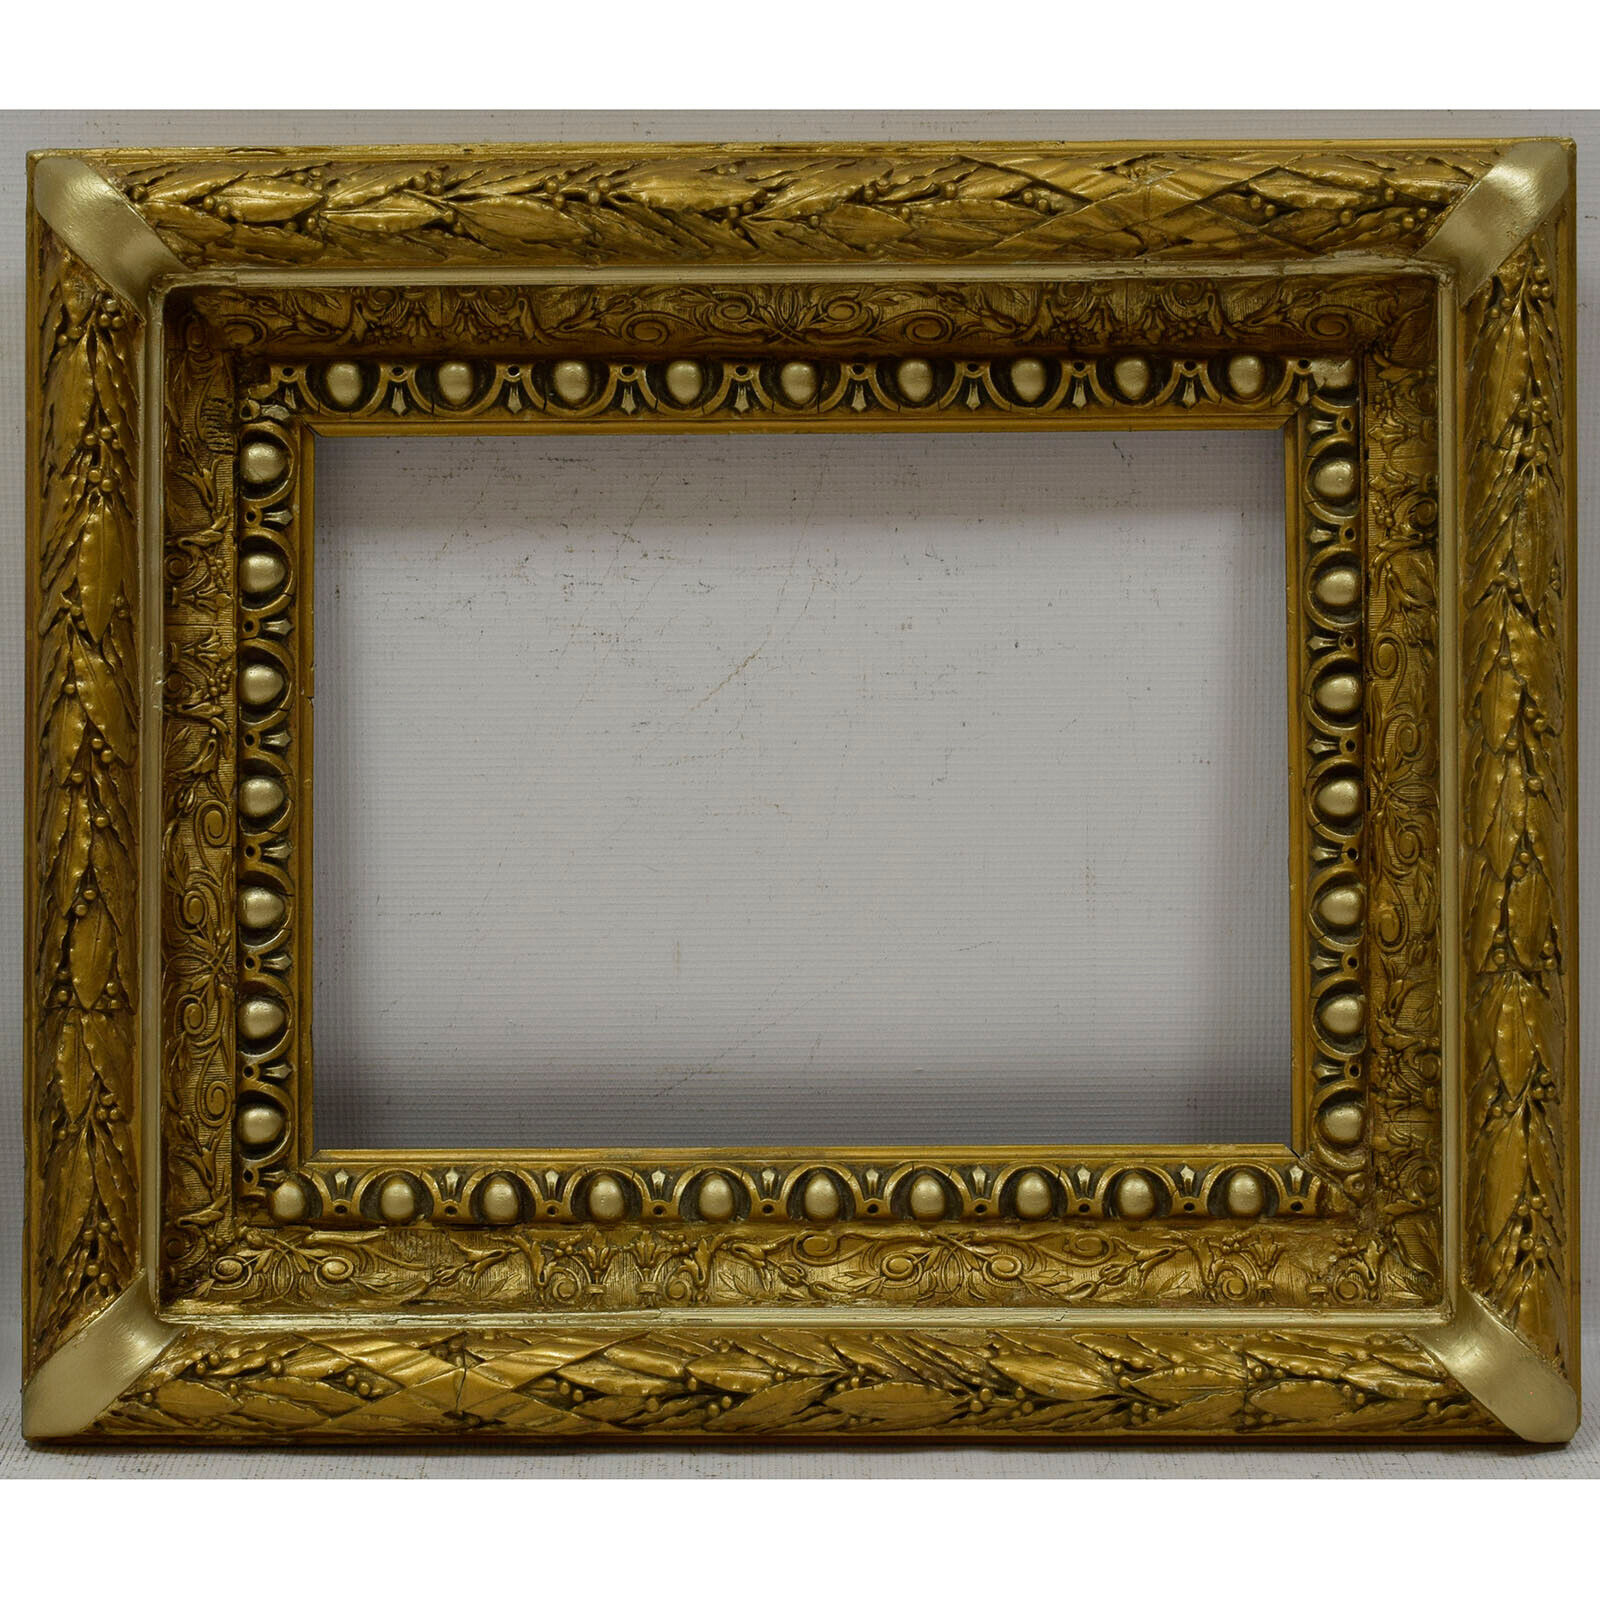 1919 Old wooden frame Original condition Internal: 14,5x11 in